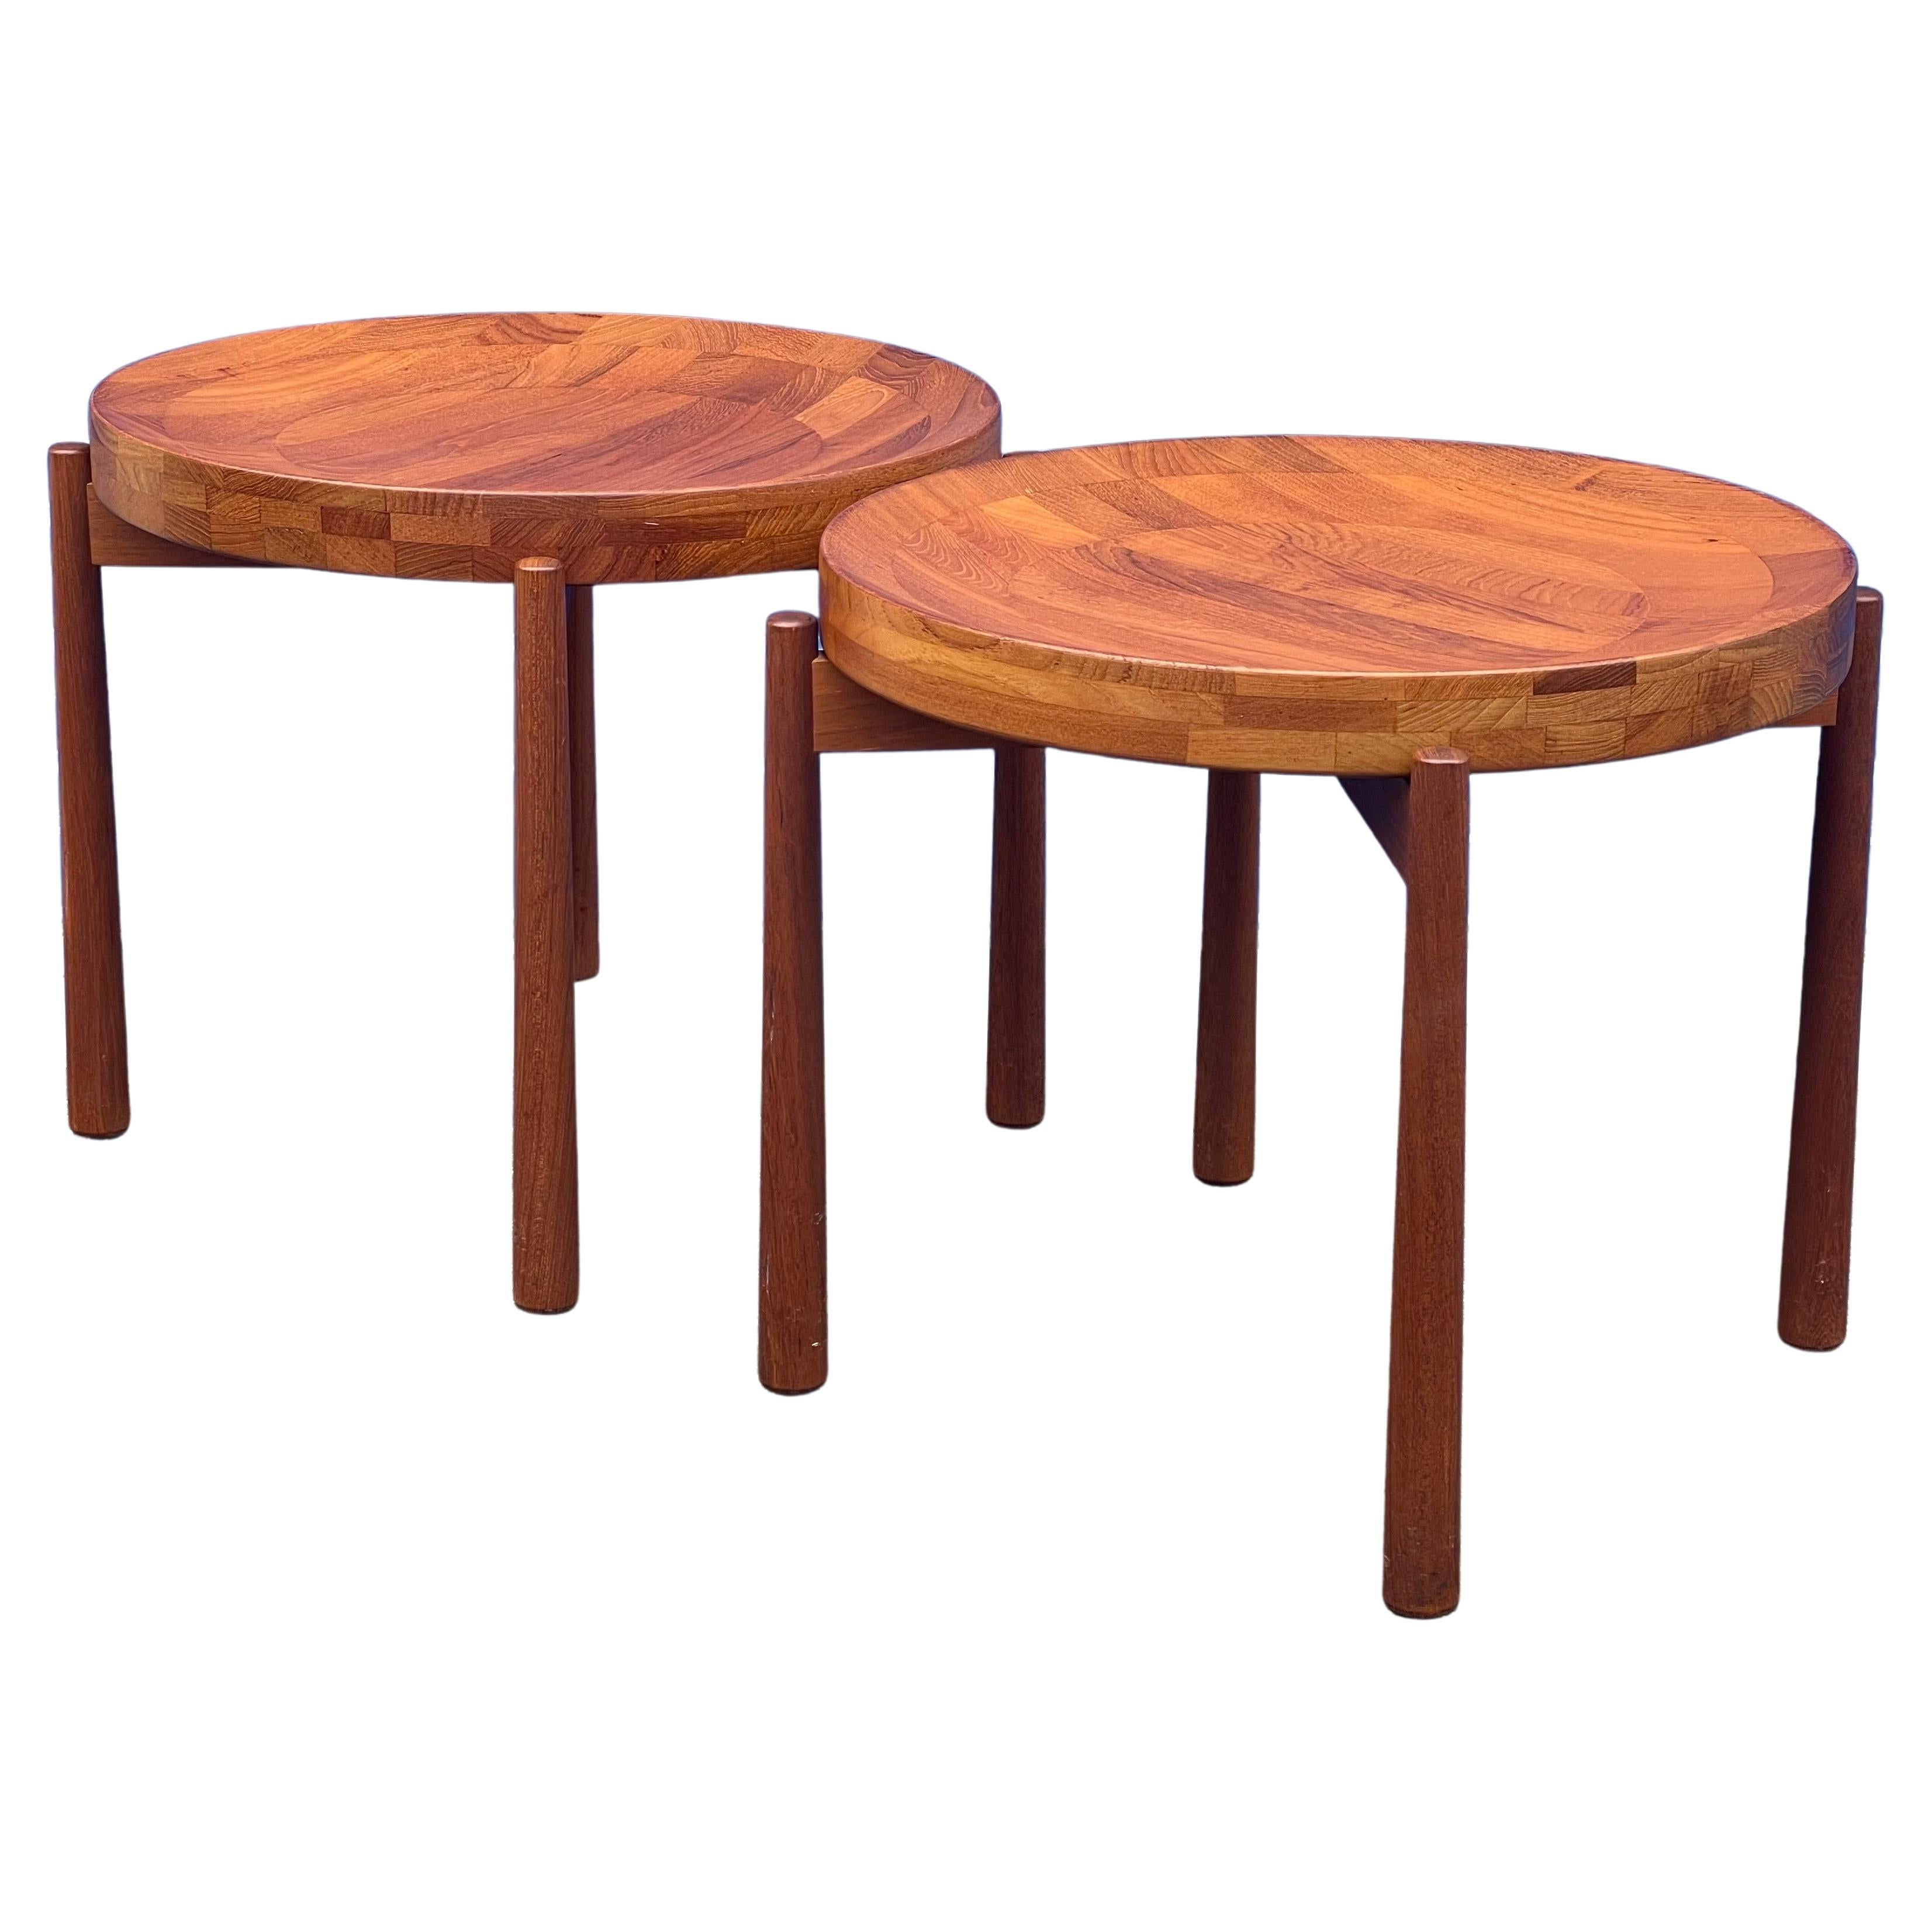 Pair of Teak Tray Side Tables Attributed to Jens Quistgaard for DUX of Sweden For Sale